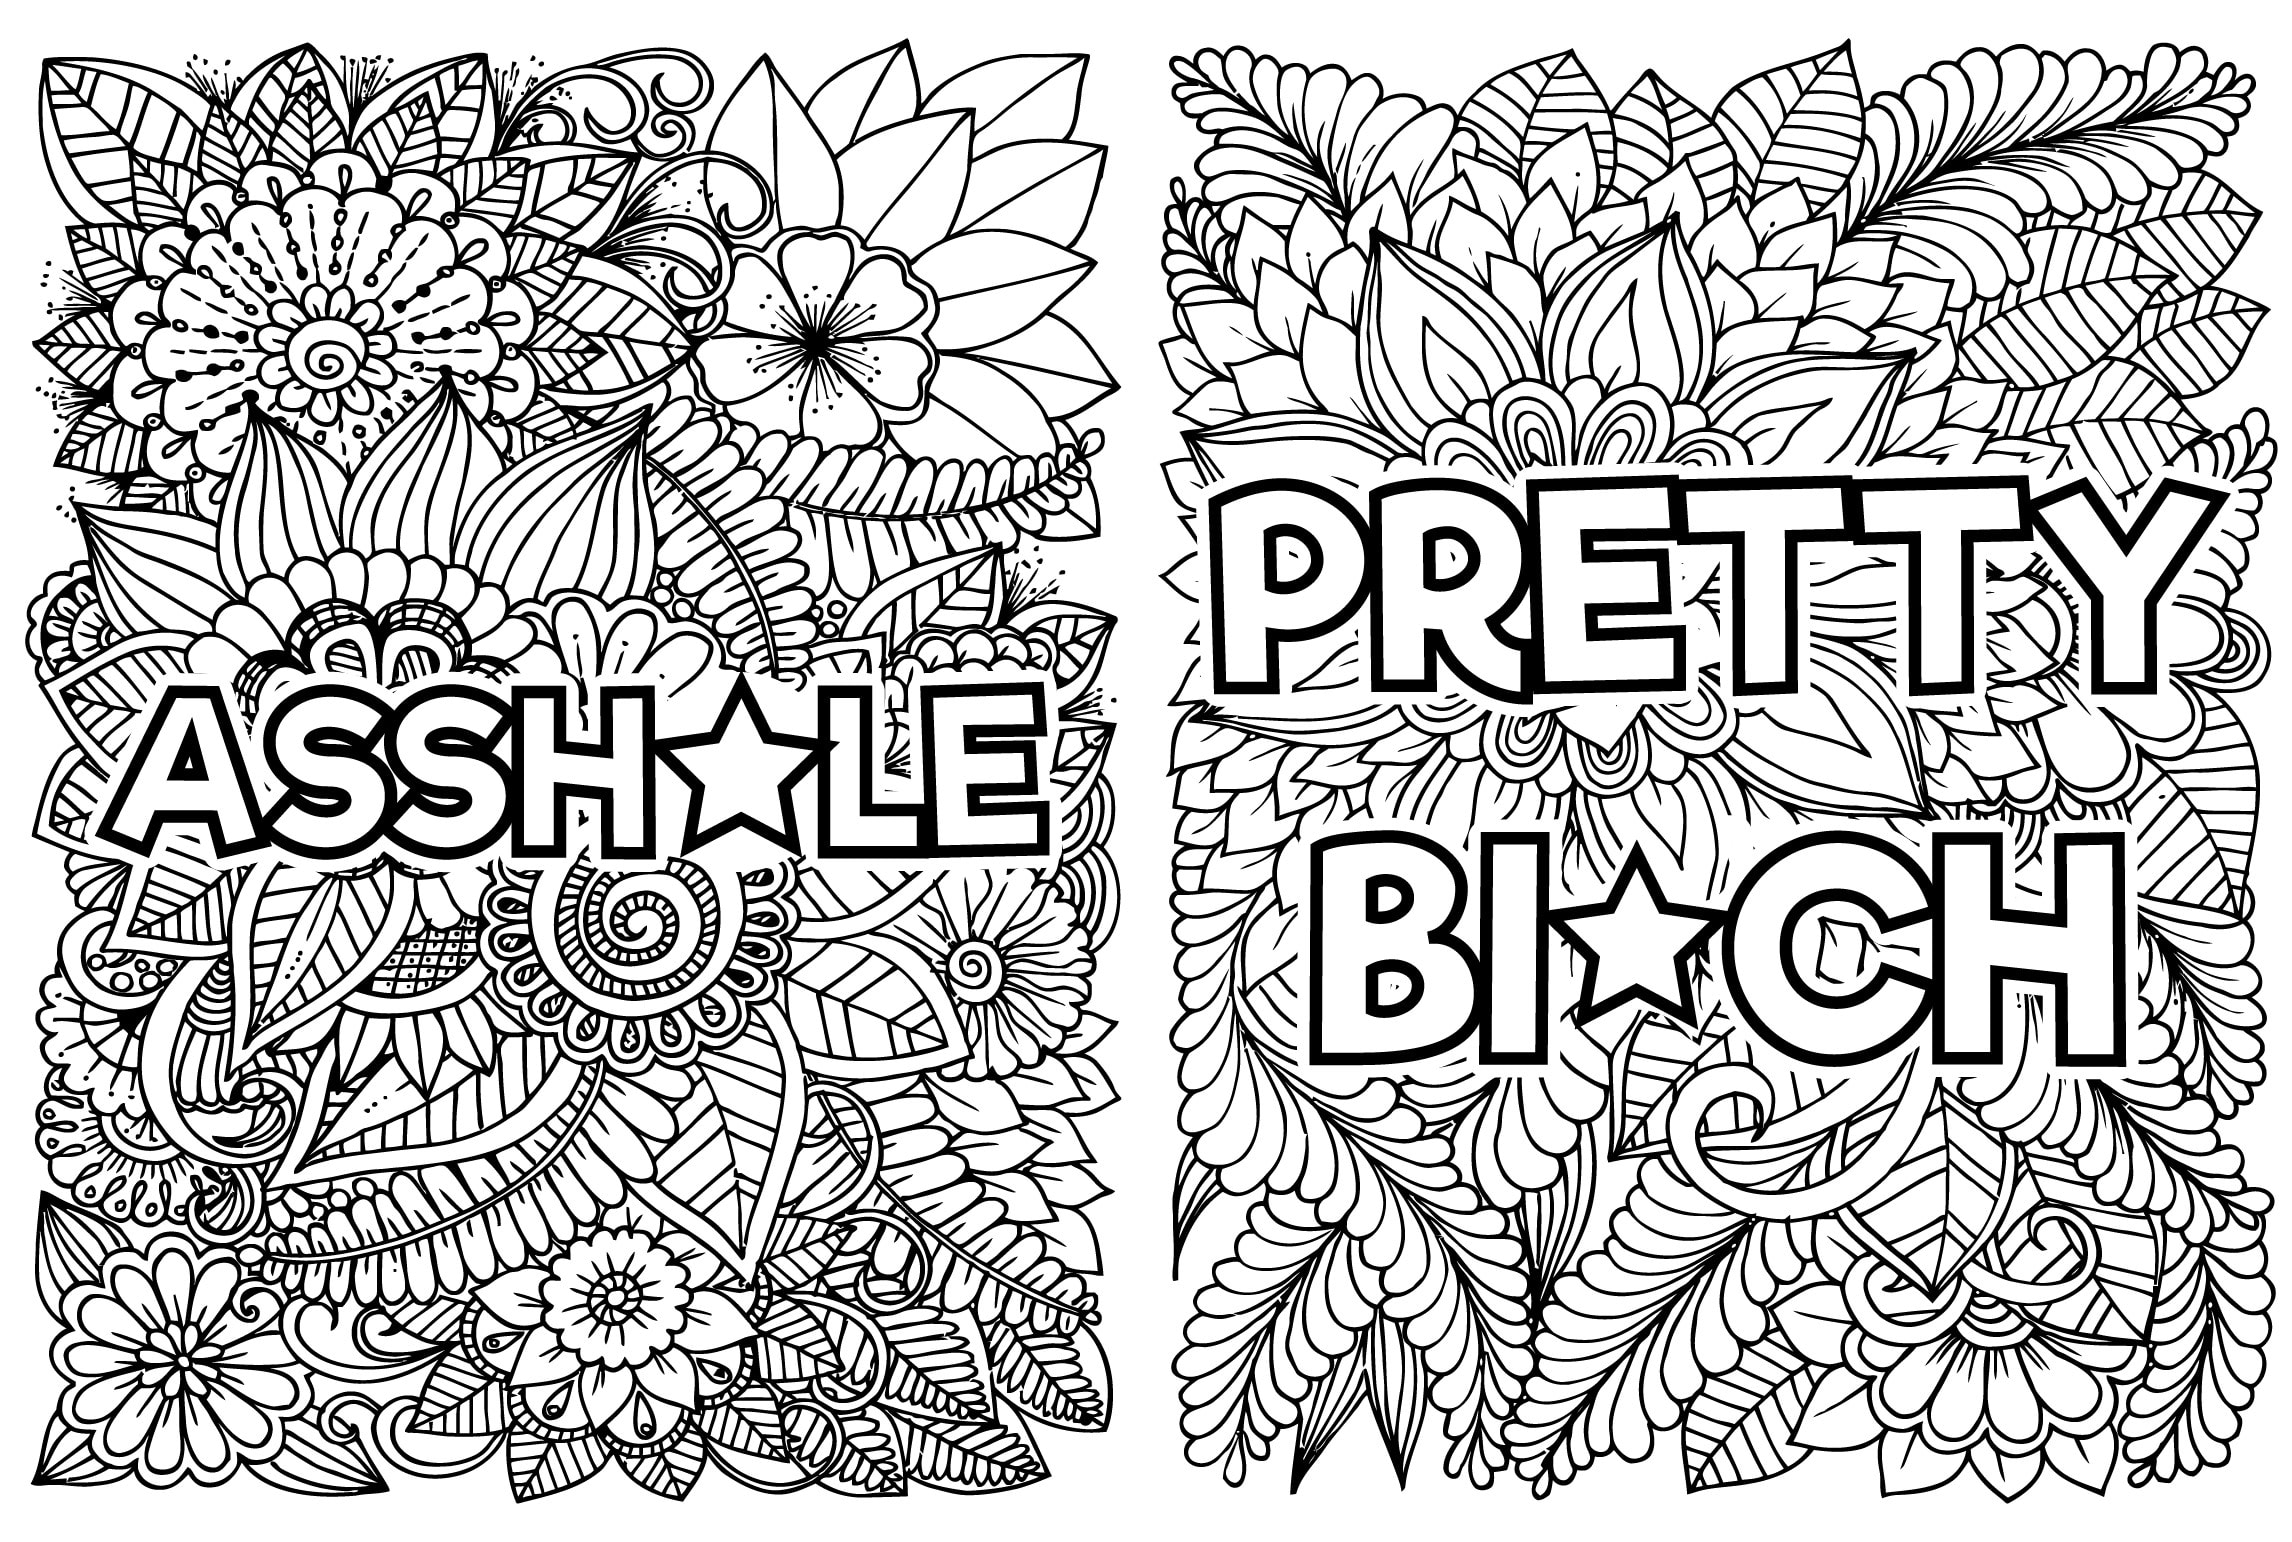 Design Complex Adult Word Coloring Book Pages For Amazon Kdp By Redwan78 Fiverr